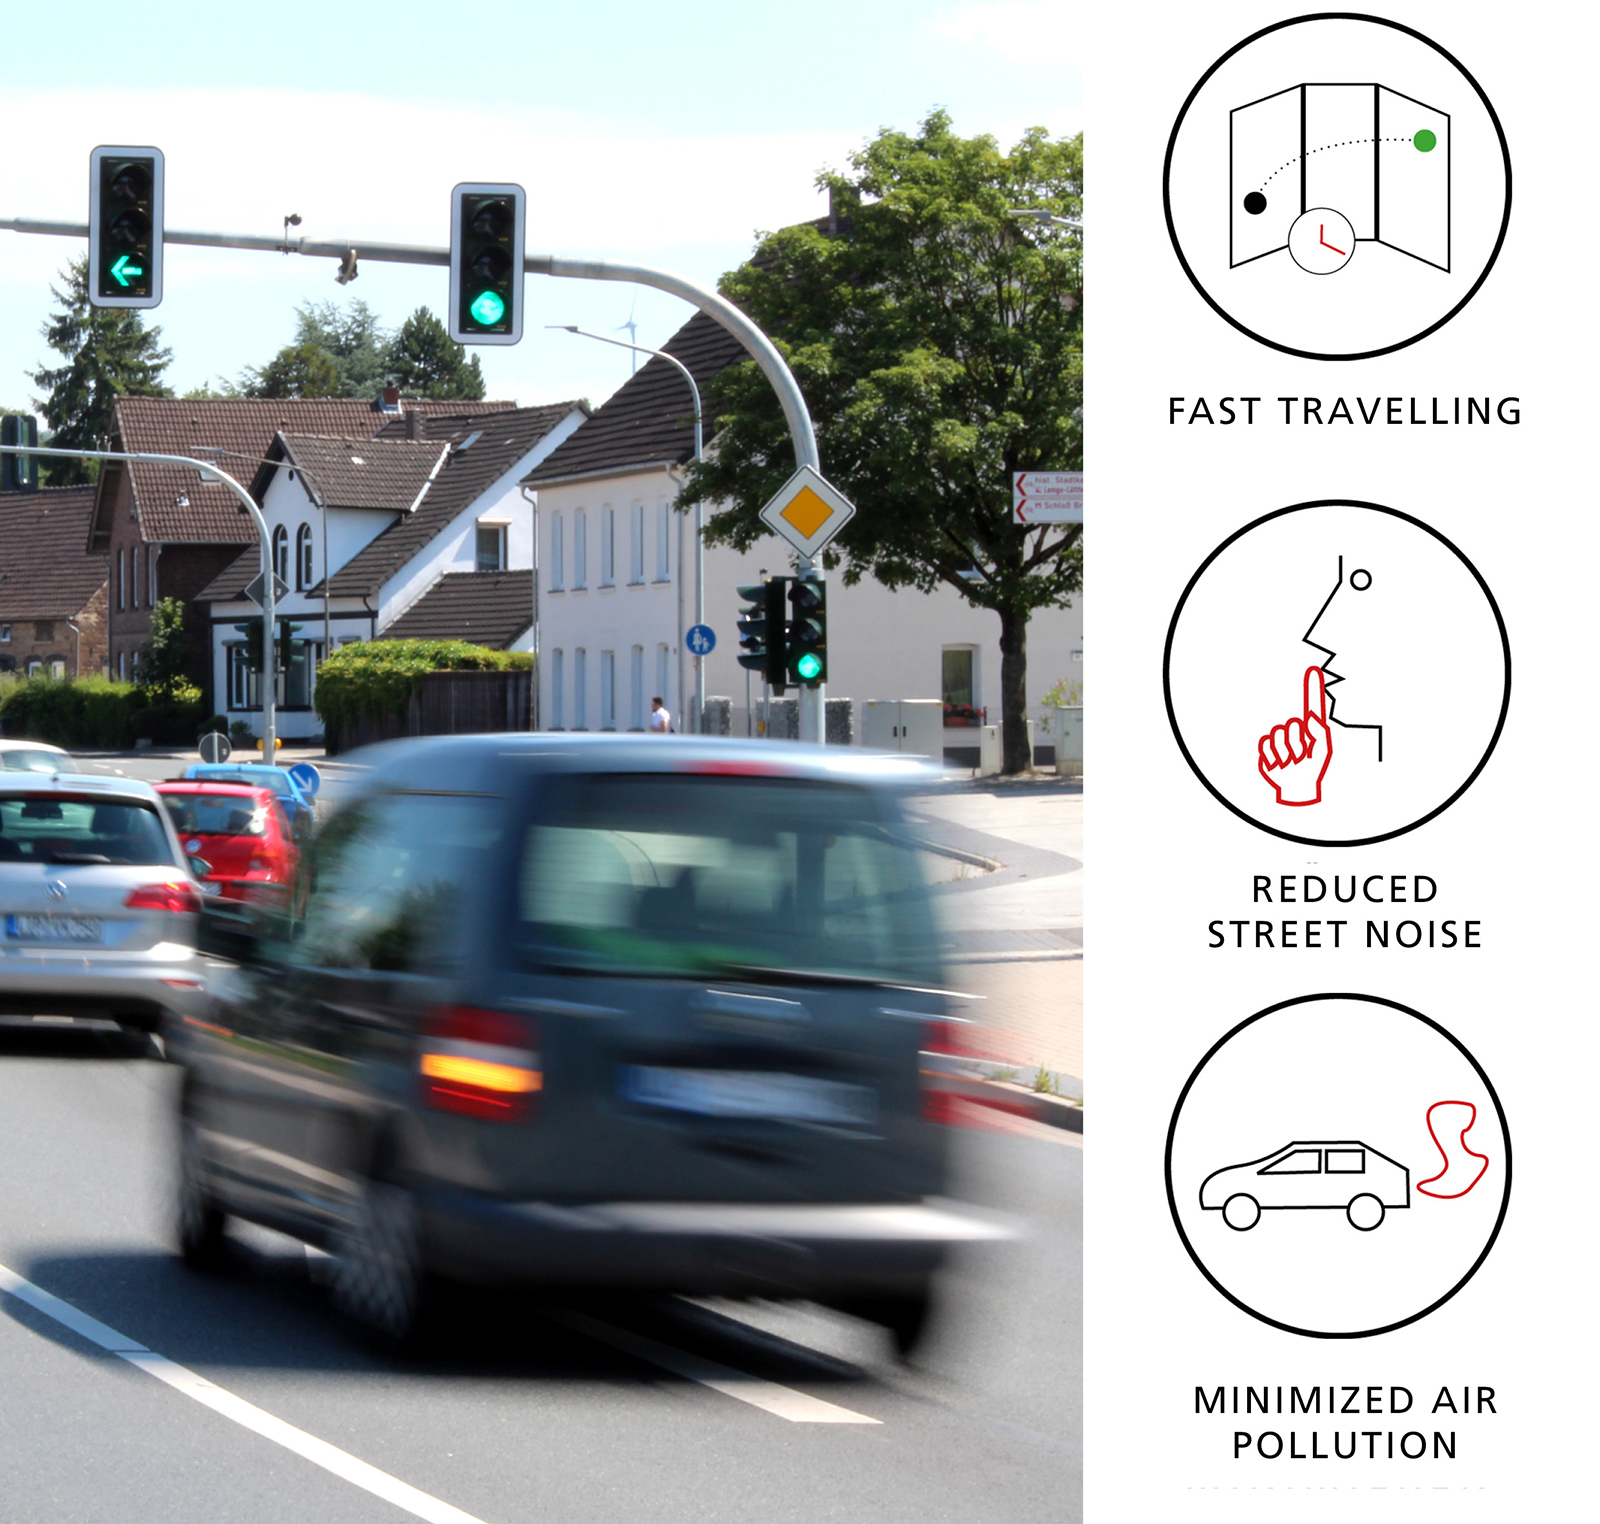 The trained algorithms calculate optimum traffic light changing behavior to optimize the flow of traffic and reduce the noise and CO2 pollution from the traffic jams.